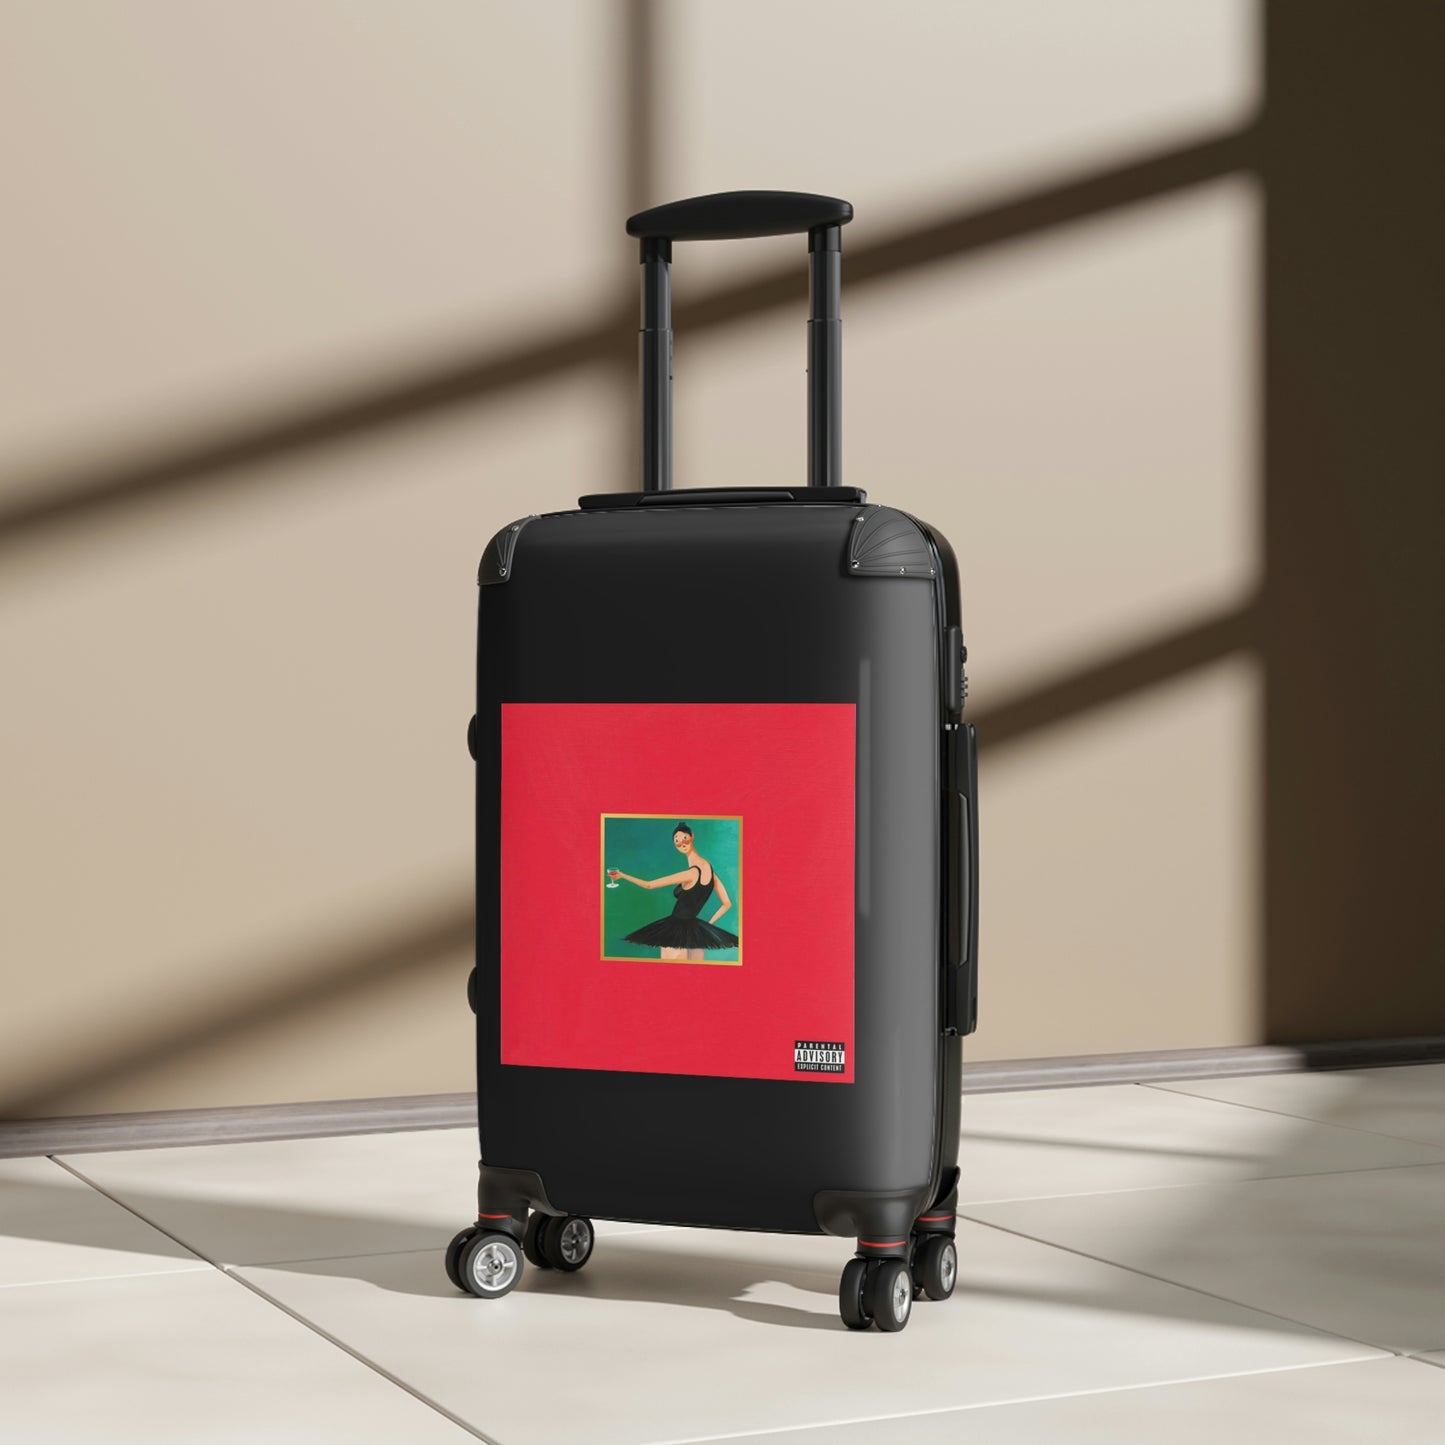 Copy of Kanye West My Beautiful Dark Twisted Fantasy 2010 Cabin Suitcase